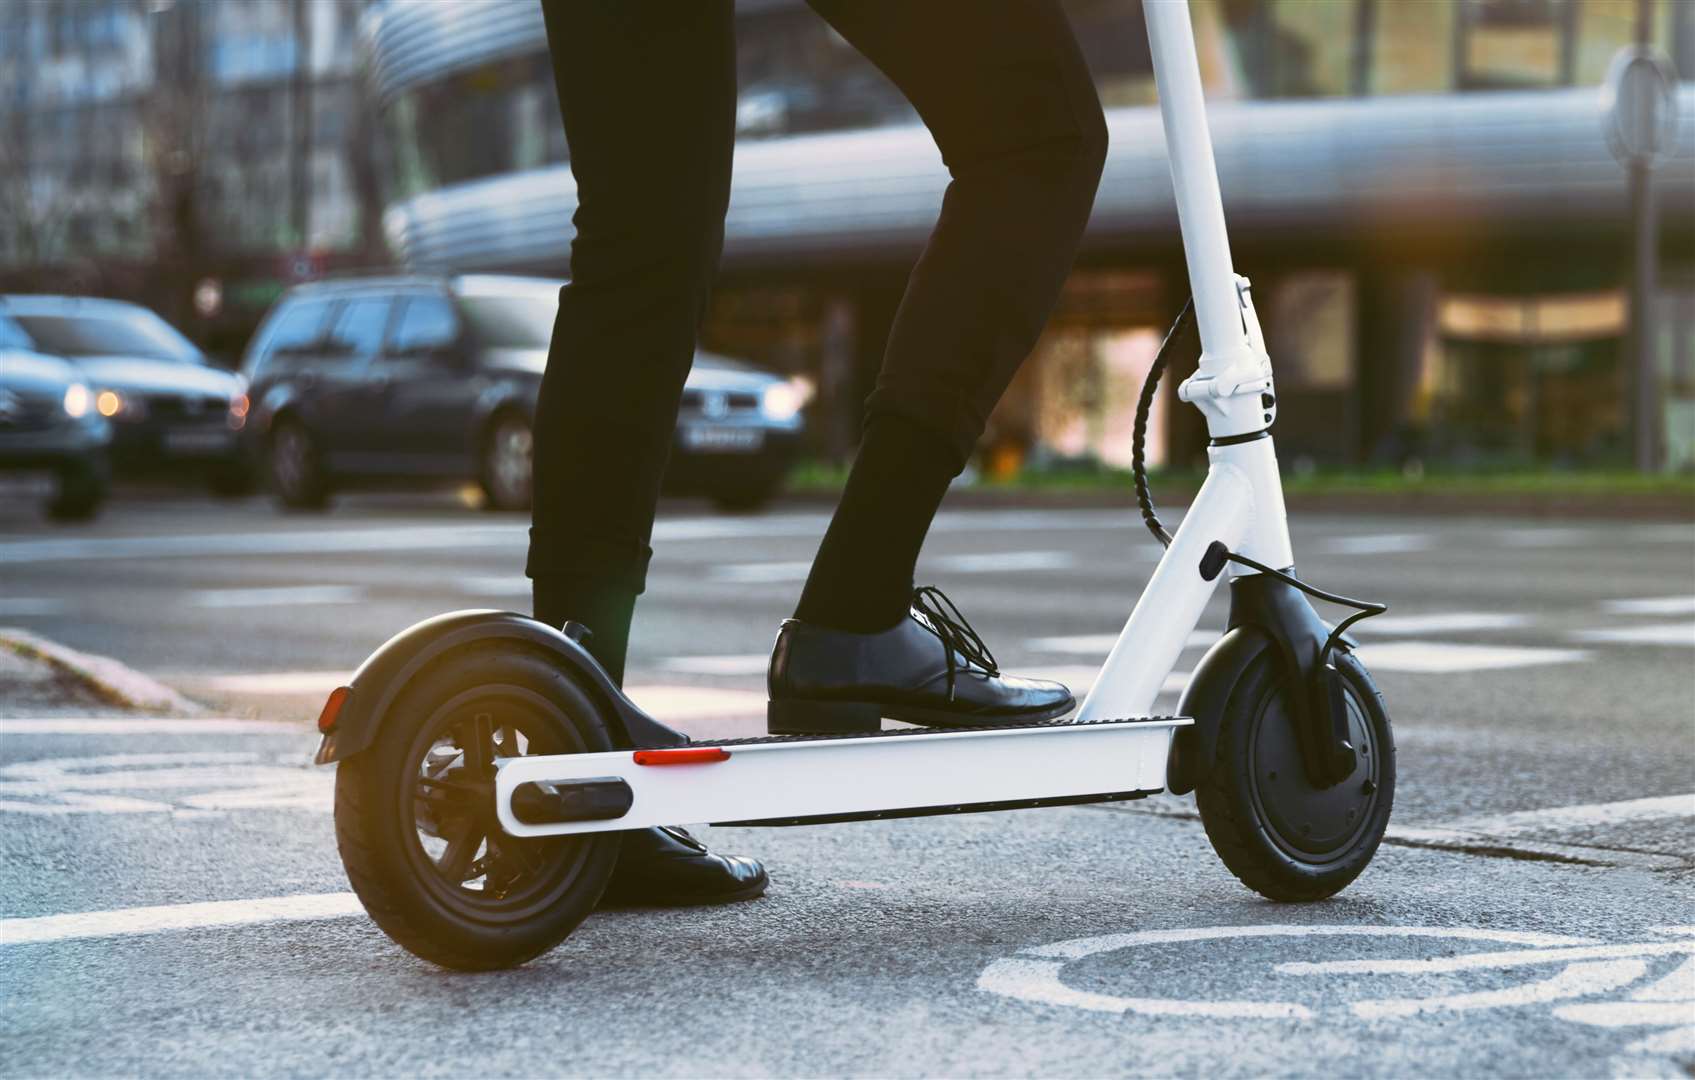 More action is needed over dangerous e-scooter riders, says one reader. Picture iStock